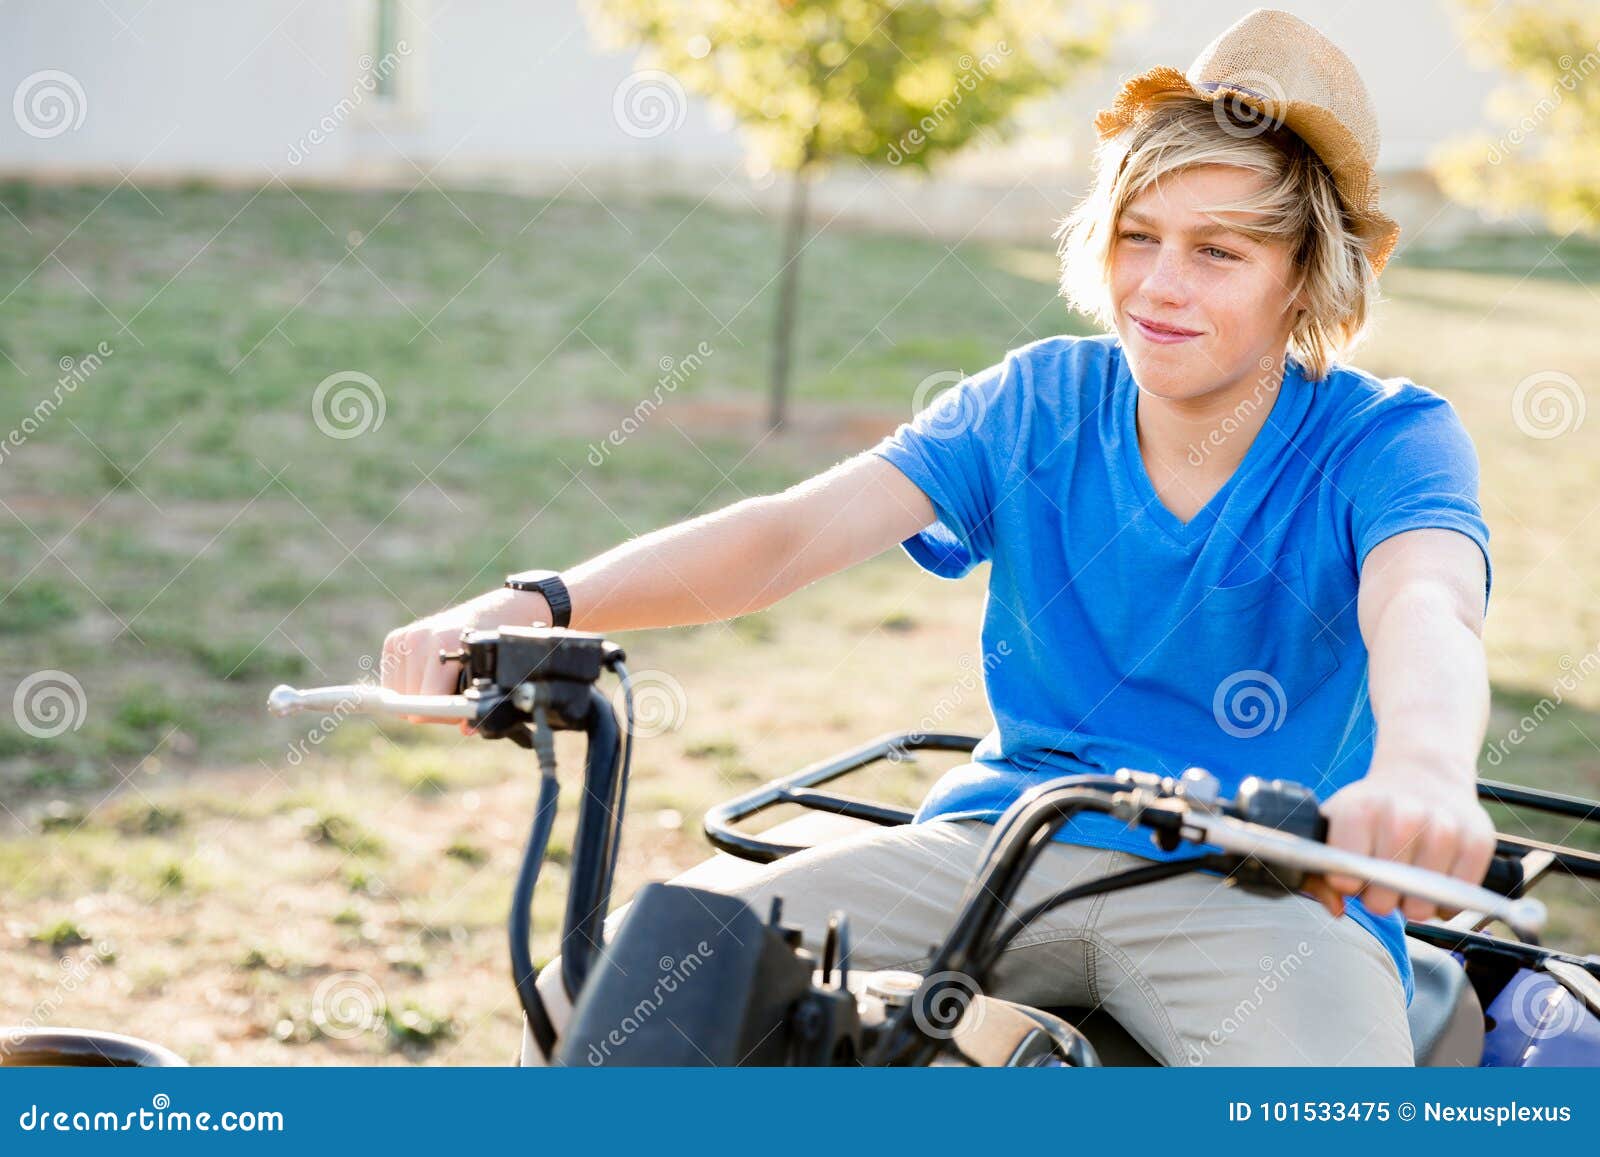 Boy Riding Farm Truck in Vineyard Stock Image - Image of agriculture ...